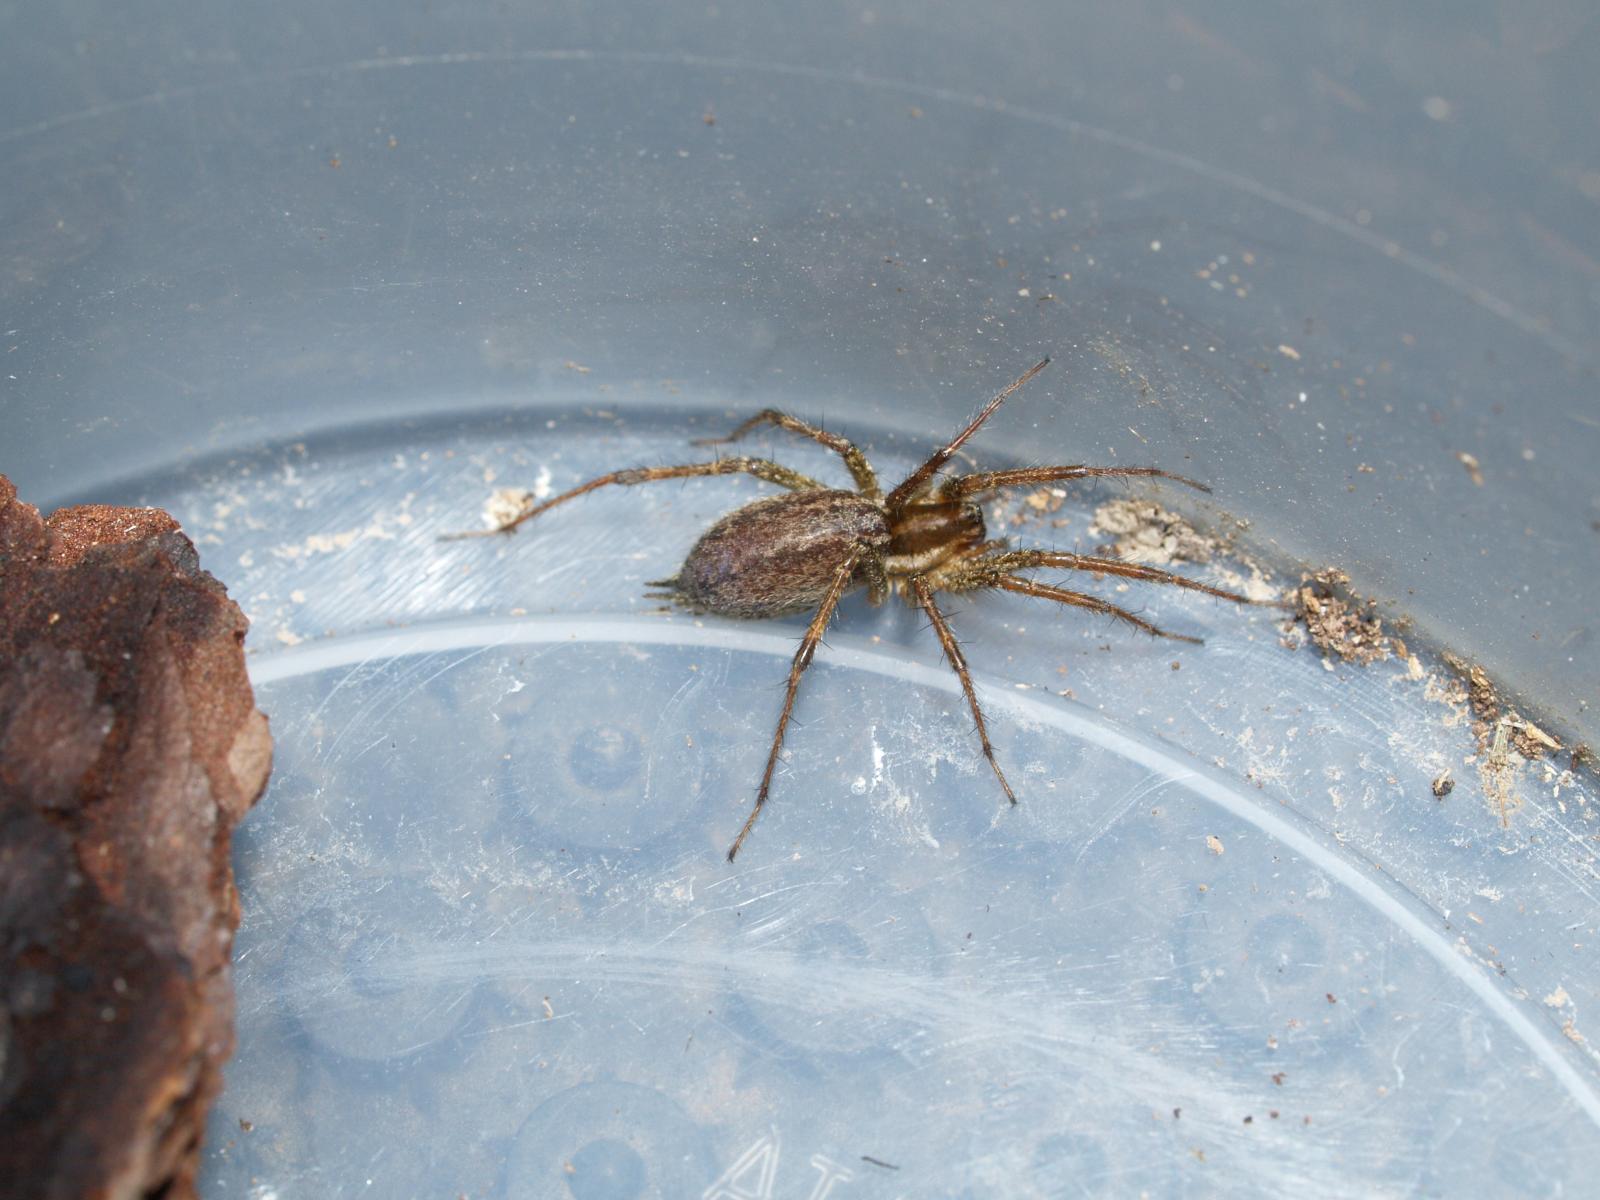 funnel web spider in petri dish showing general shape and color patern